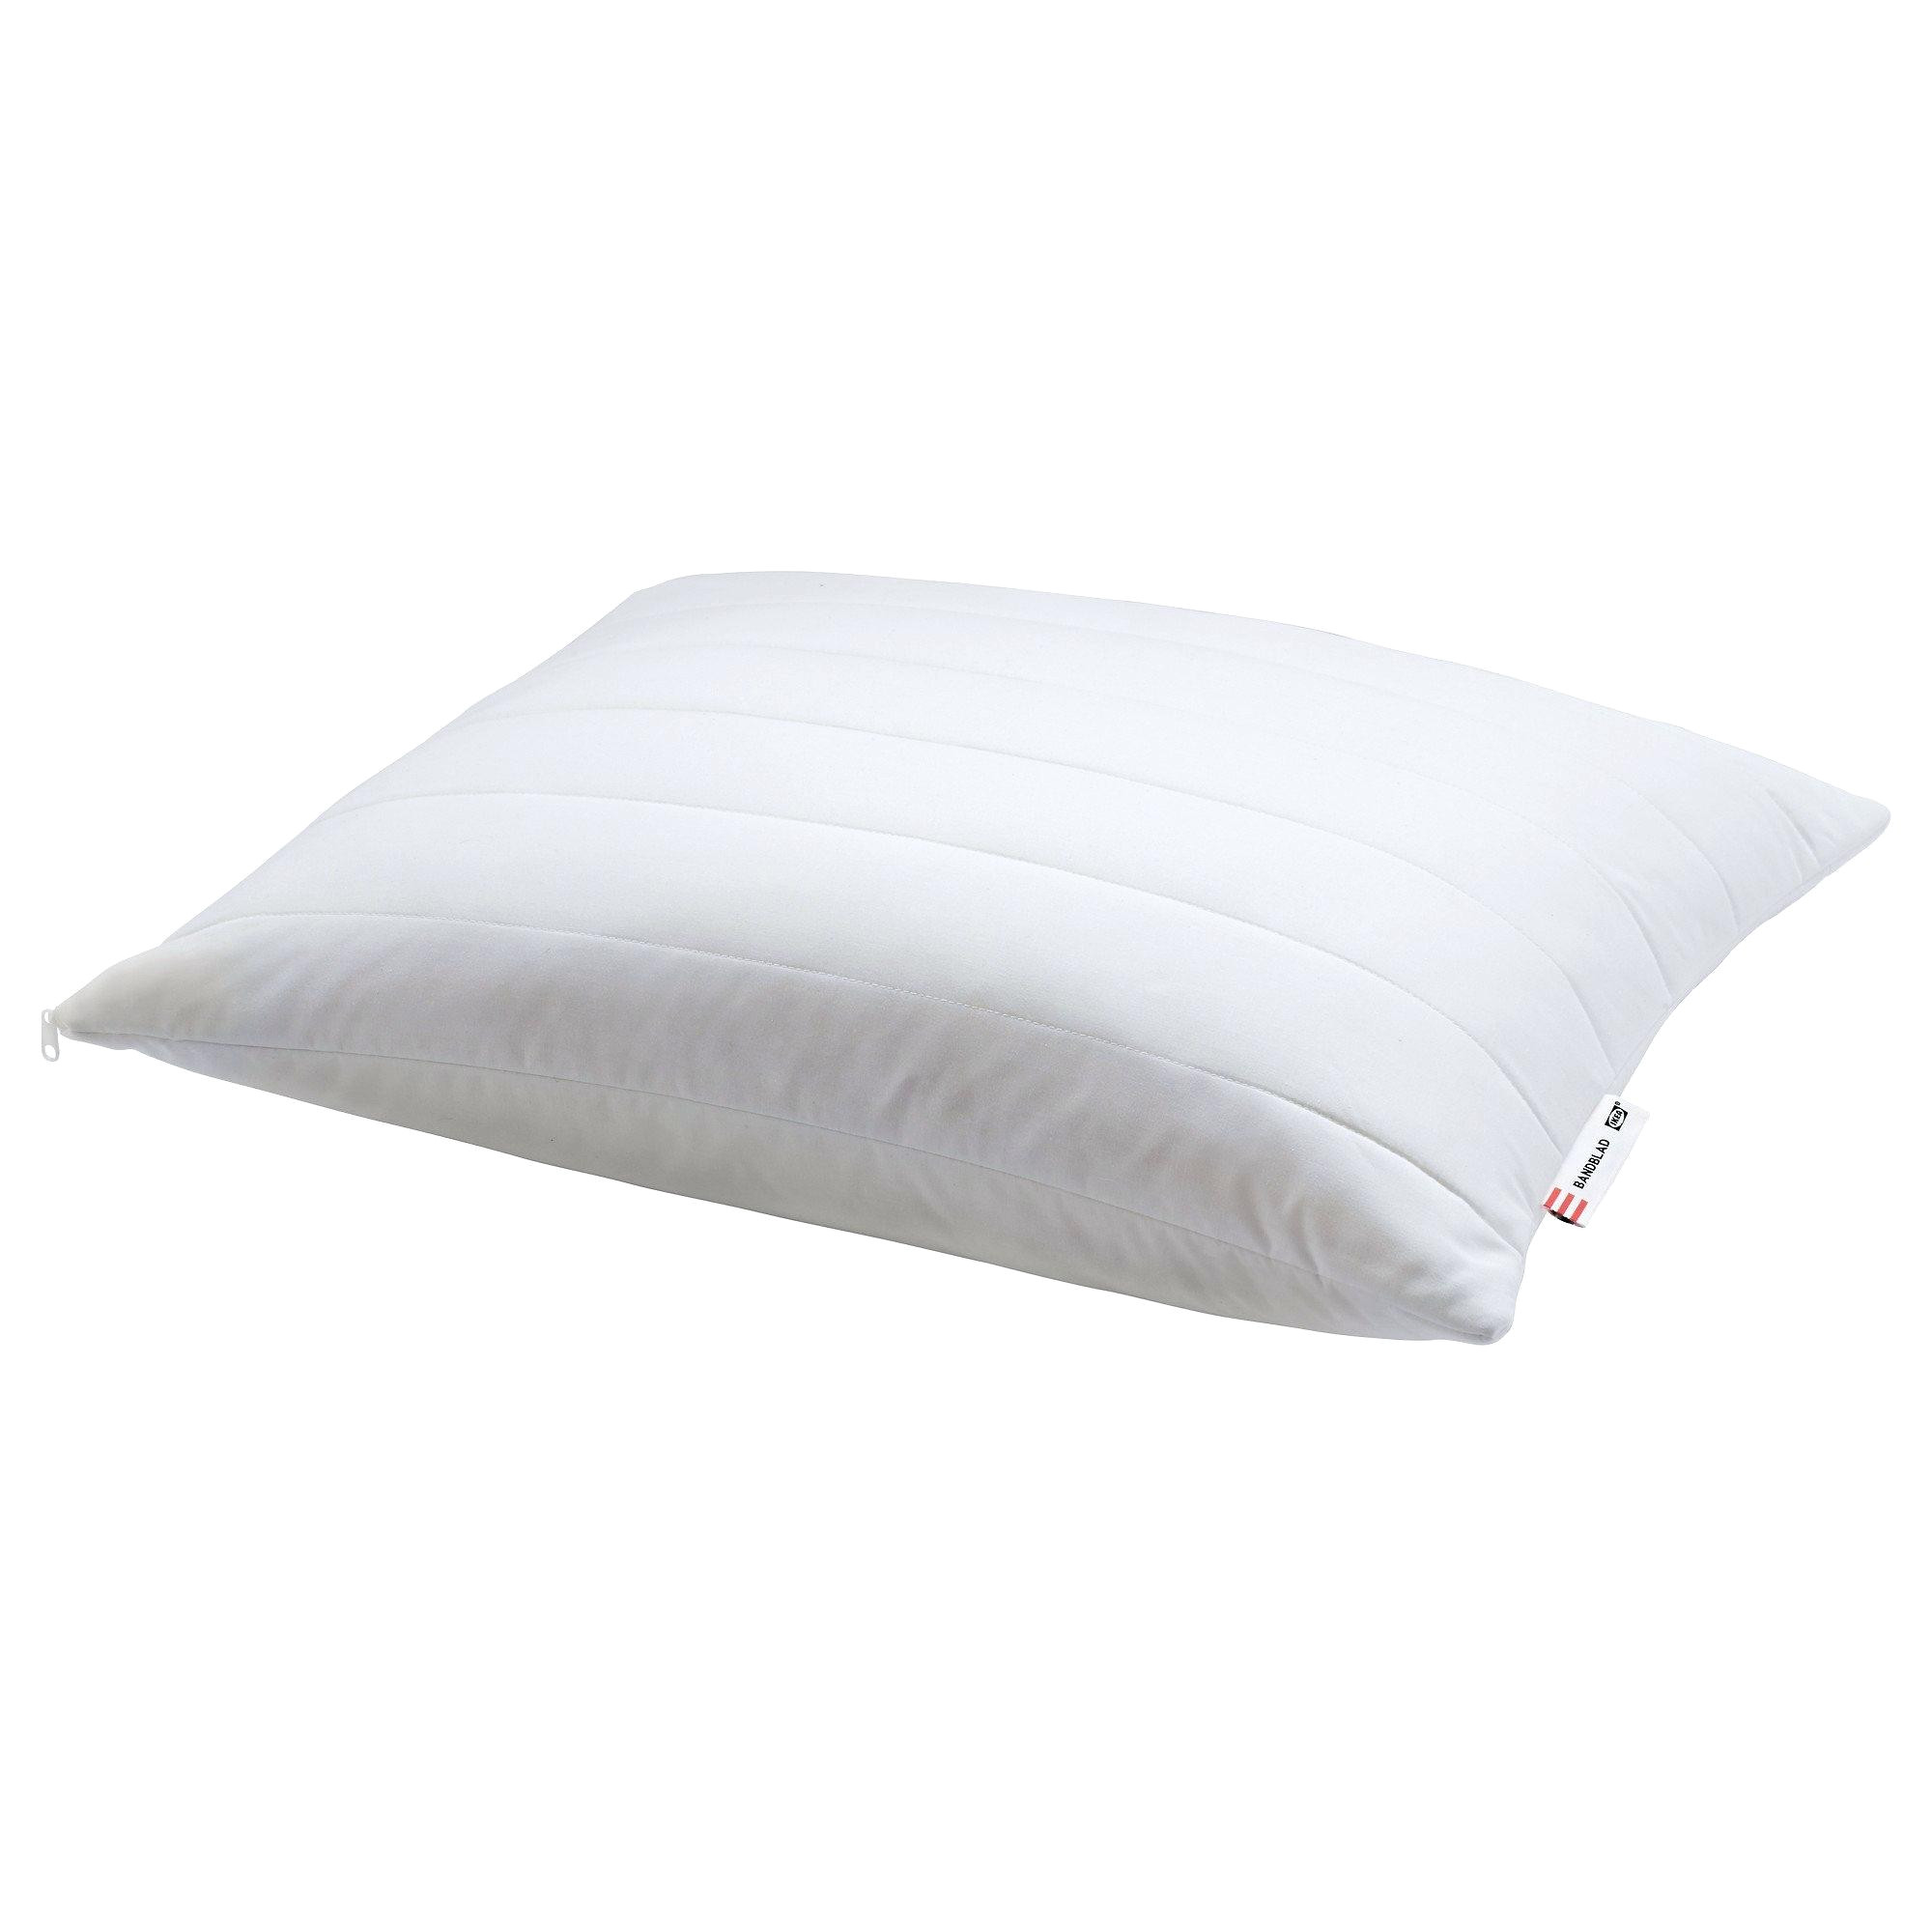 innovative ikea memory foam mattresses any good rated 73 from 100 by 780 users natural best ikea memory foam mattress